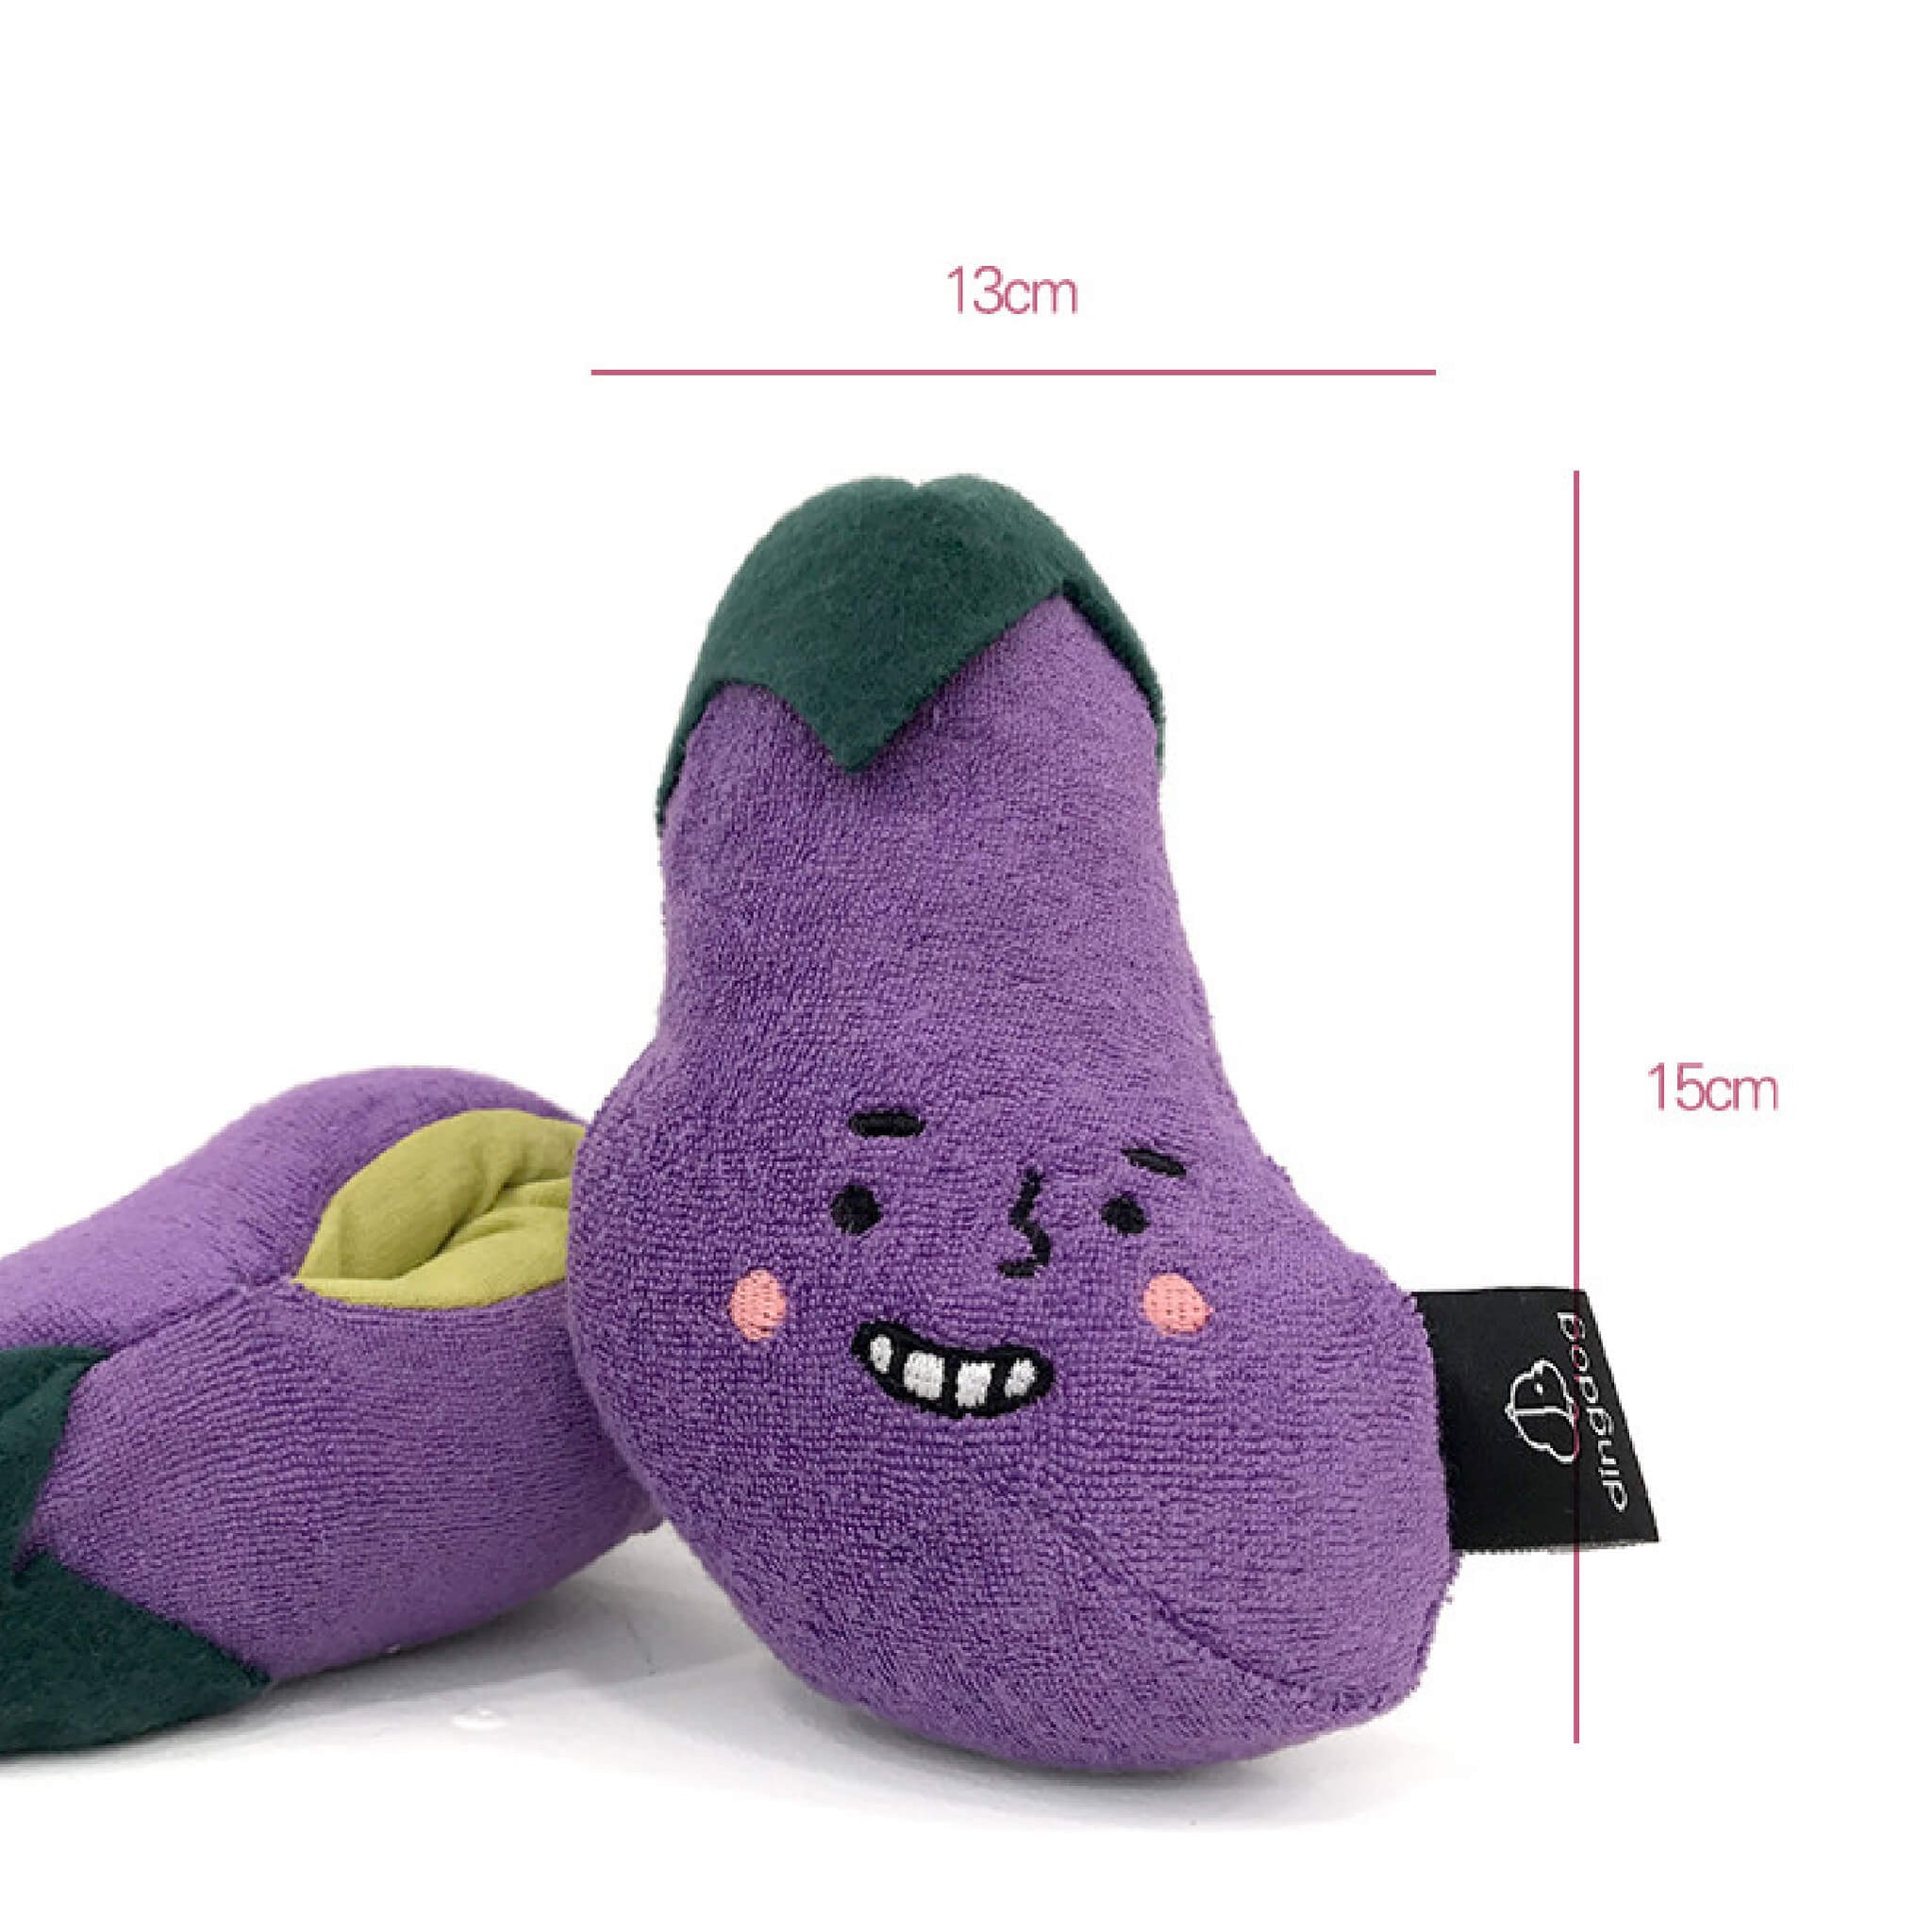 Dimensions for eggplant nosework toy.